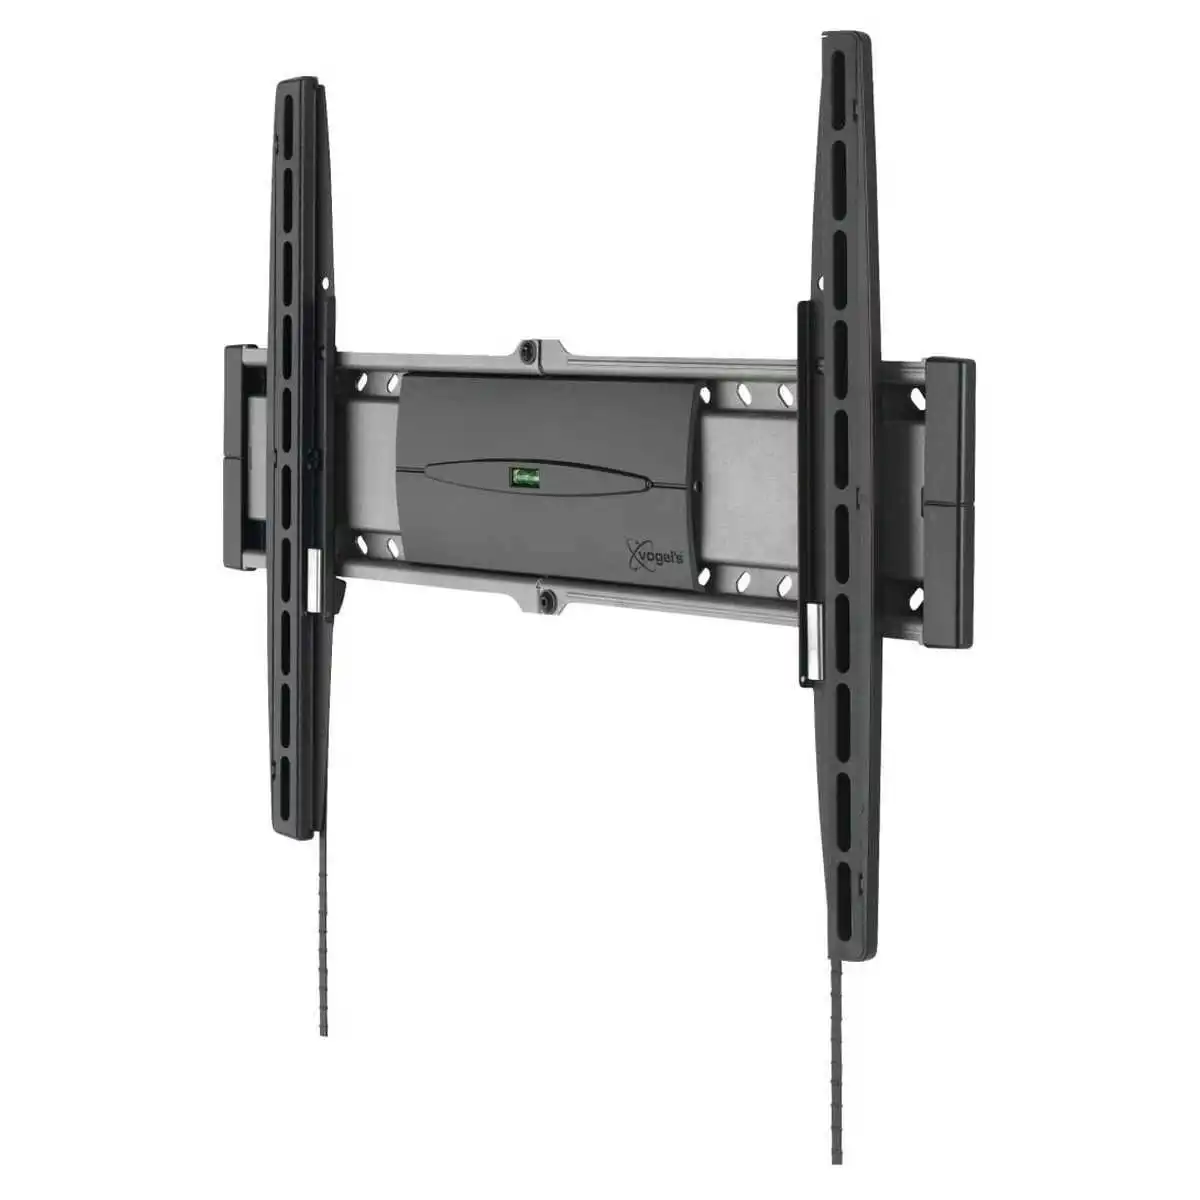 Vogel's Fixed Wall Mount for 32 to 55 Inch TVs Black